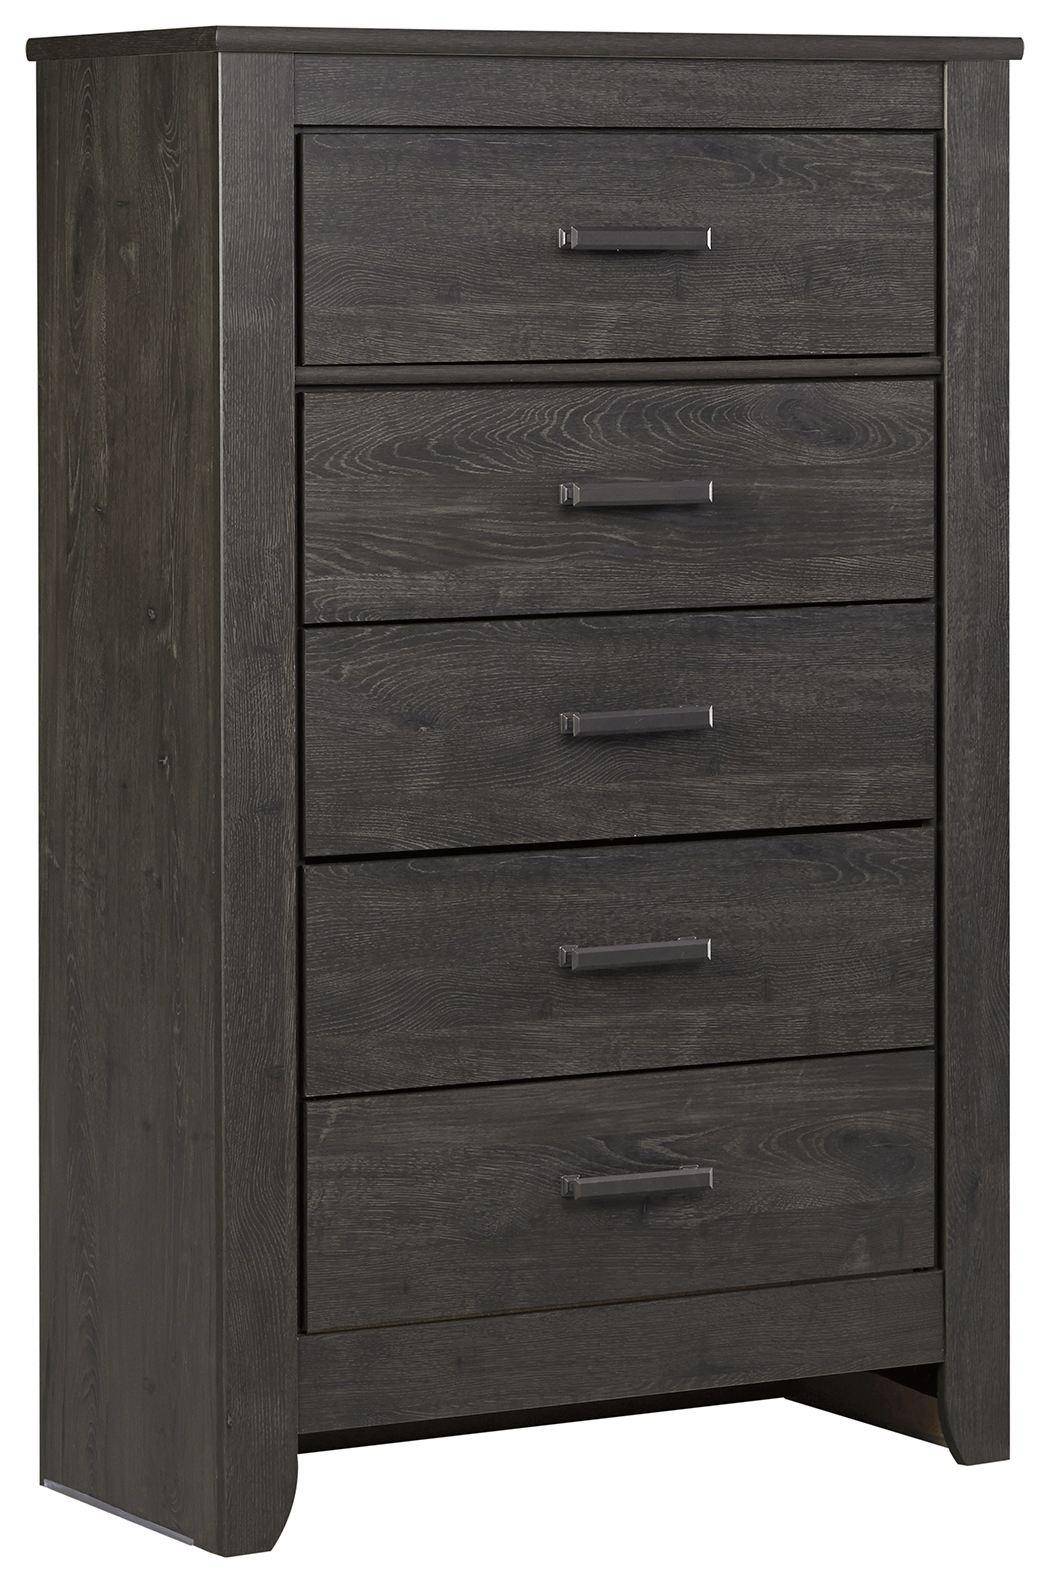 Brinxton - Charcoal - Five Drawer Chest Tony's Home Furnishings Furniture. Beds. Dressers. Sofas.